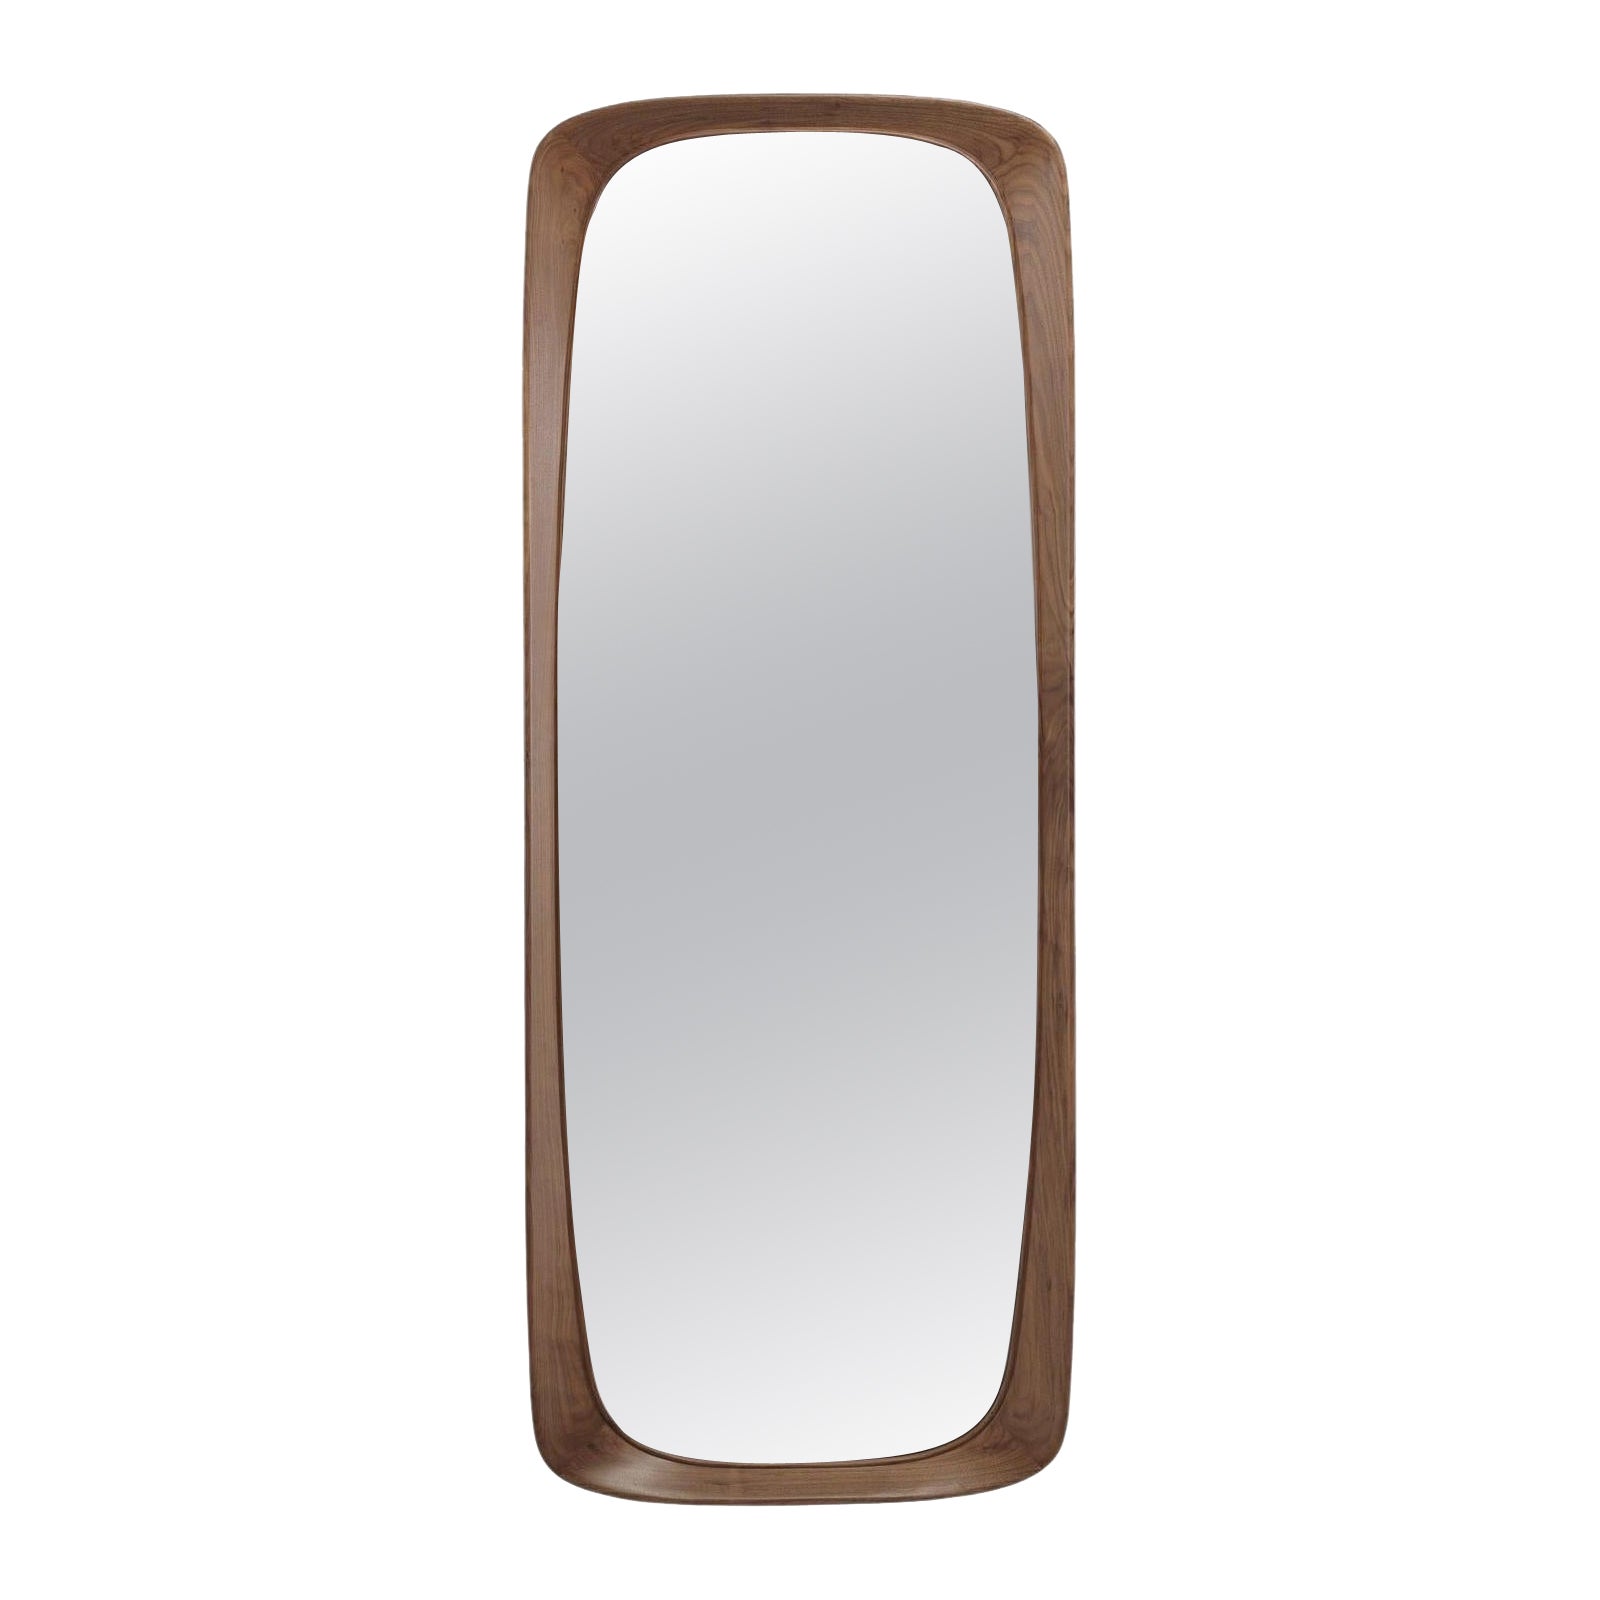 Versatile Design Large Wall Mirror with Wooden Frame